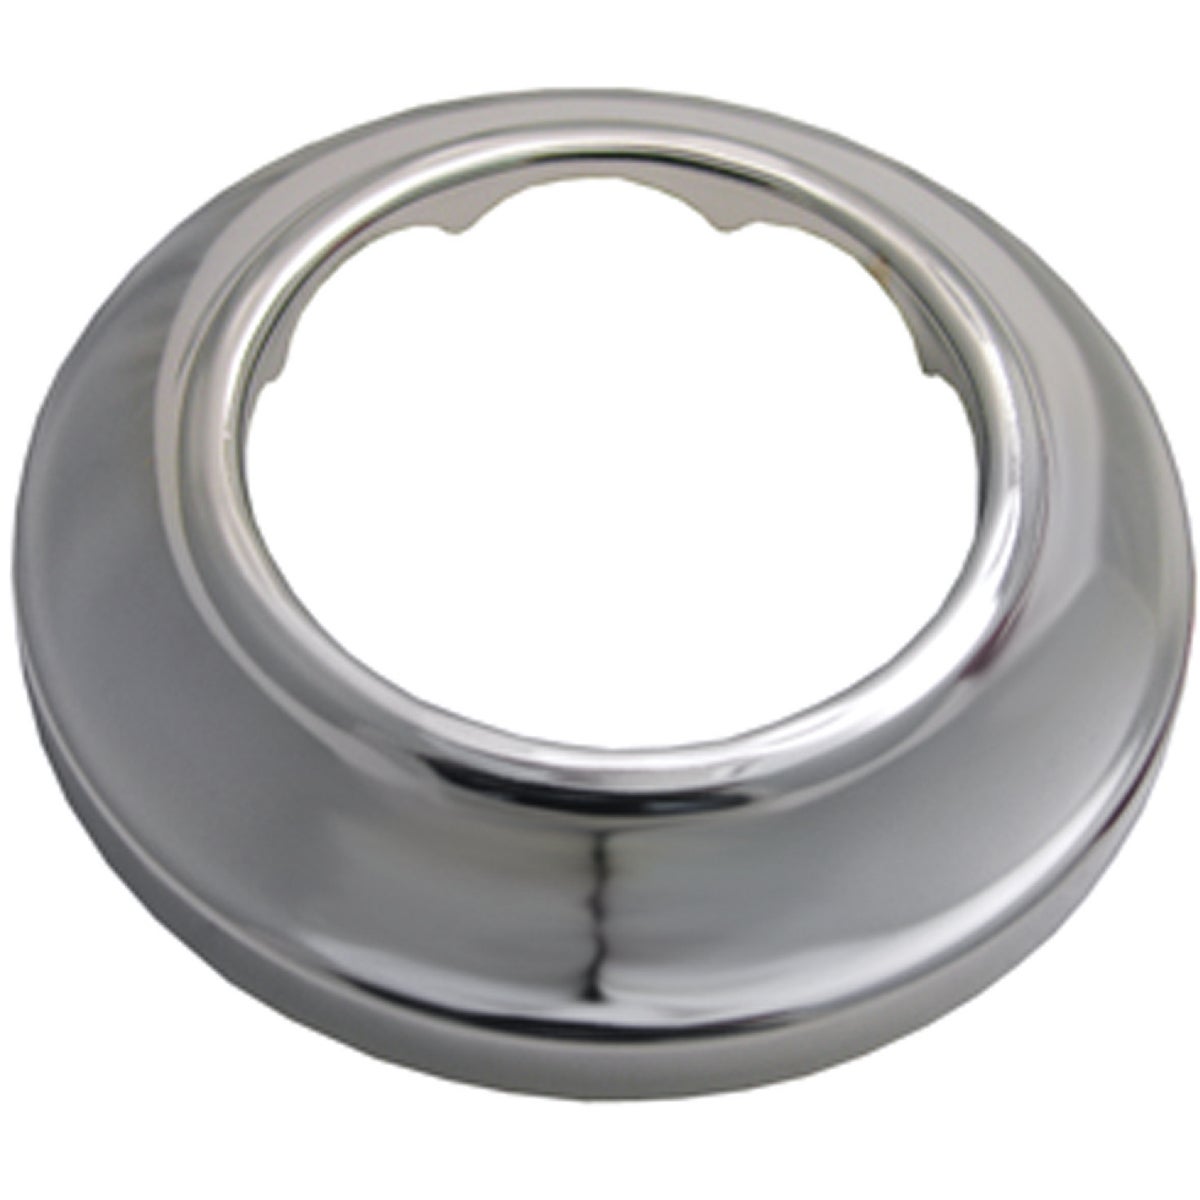 Lasco 1-1/2 In. IP Chrome Plated Flange